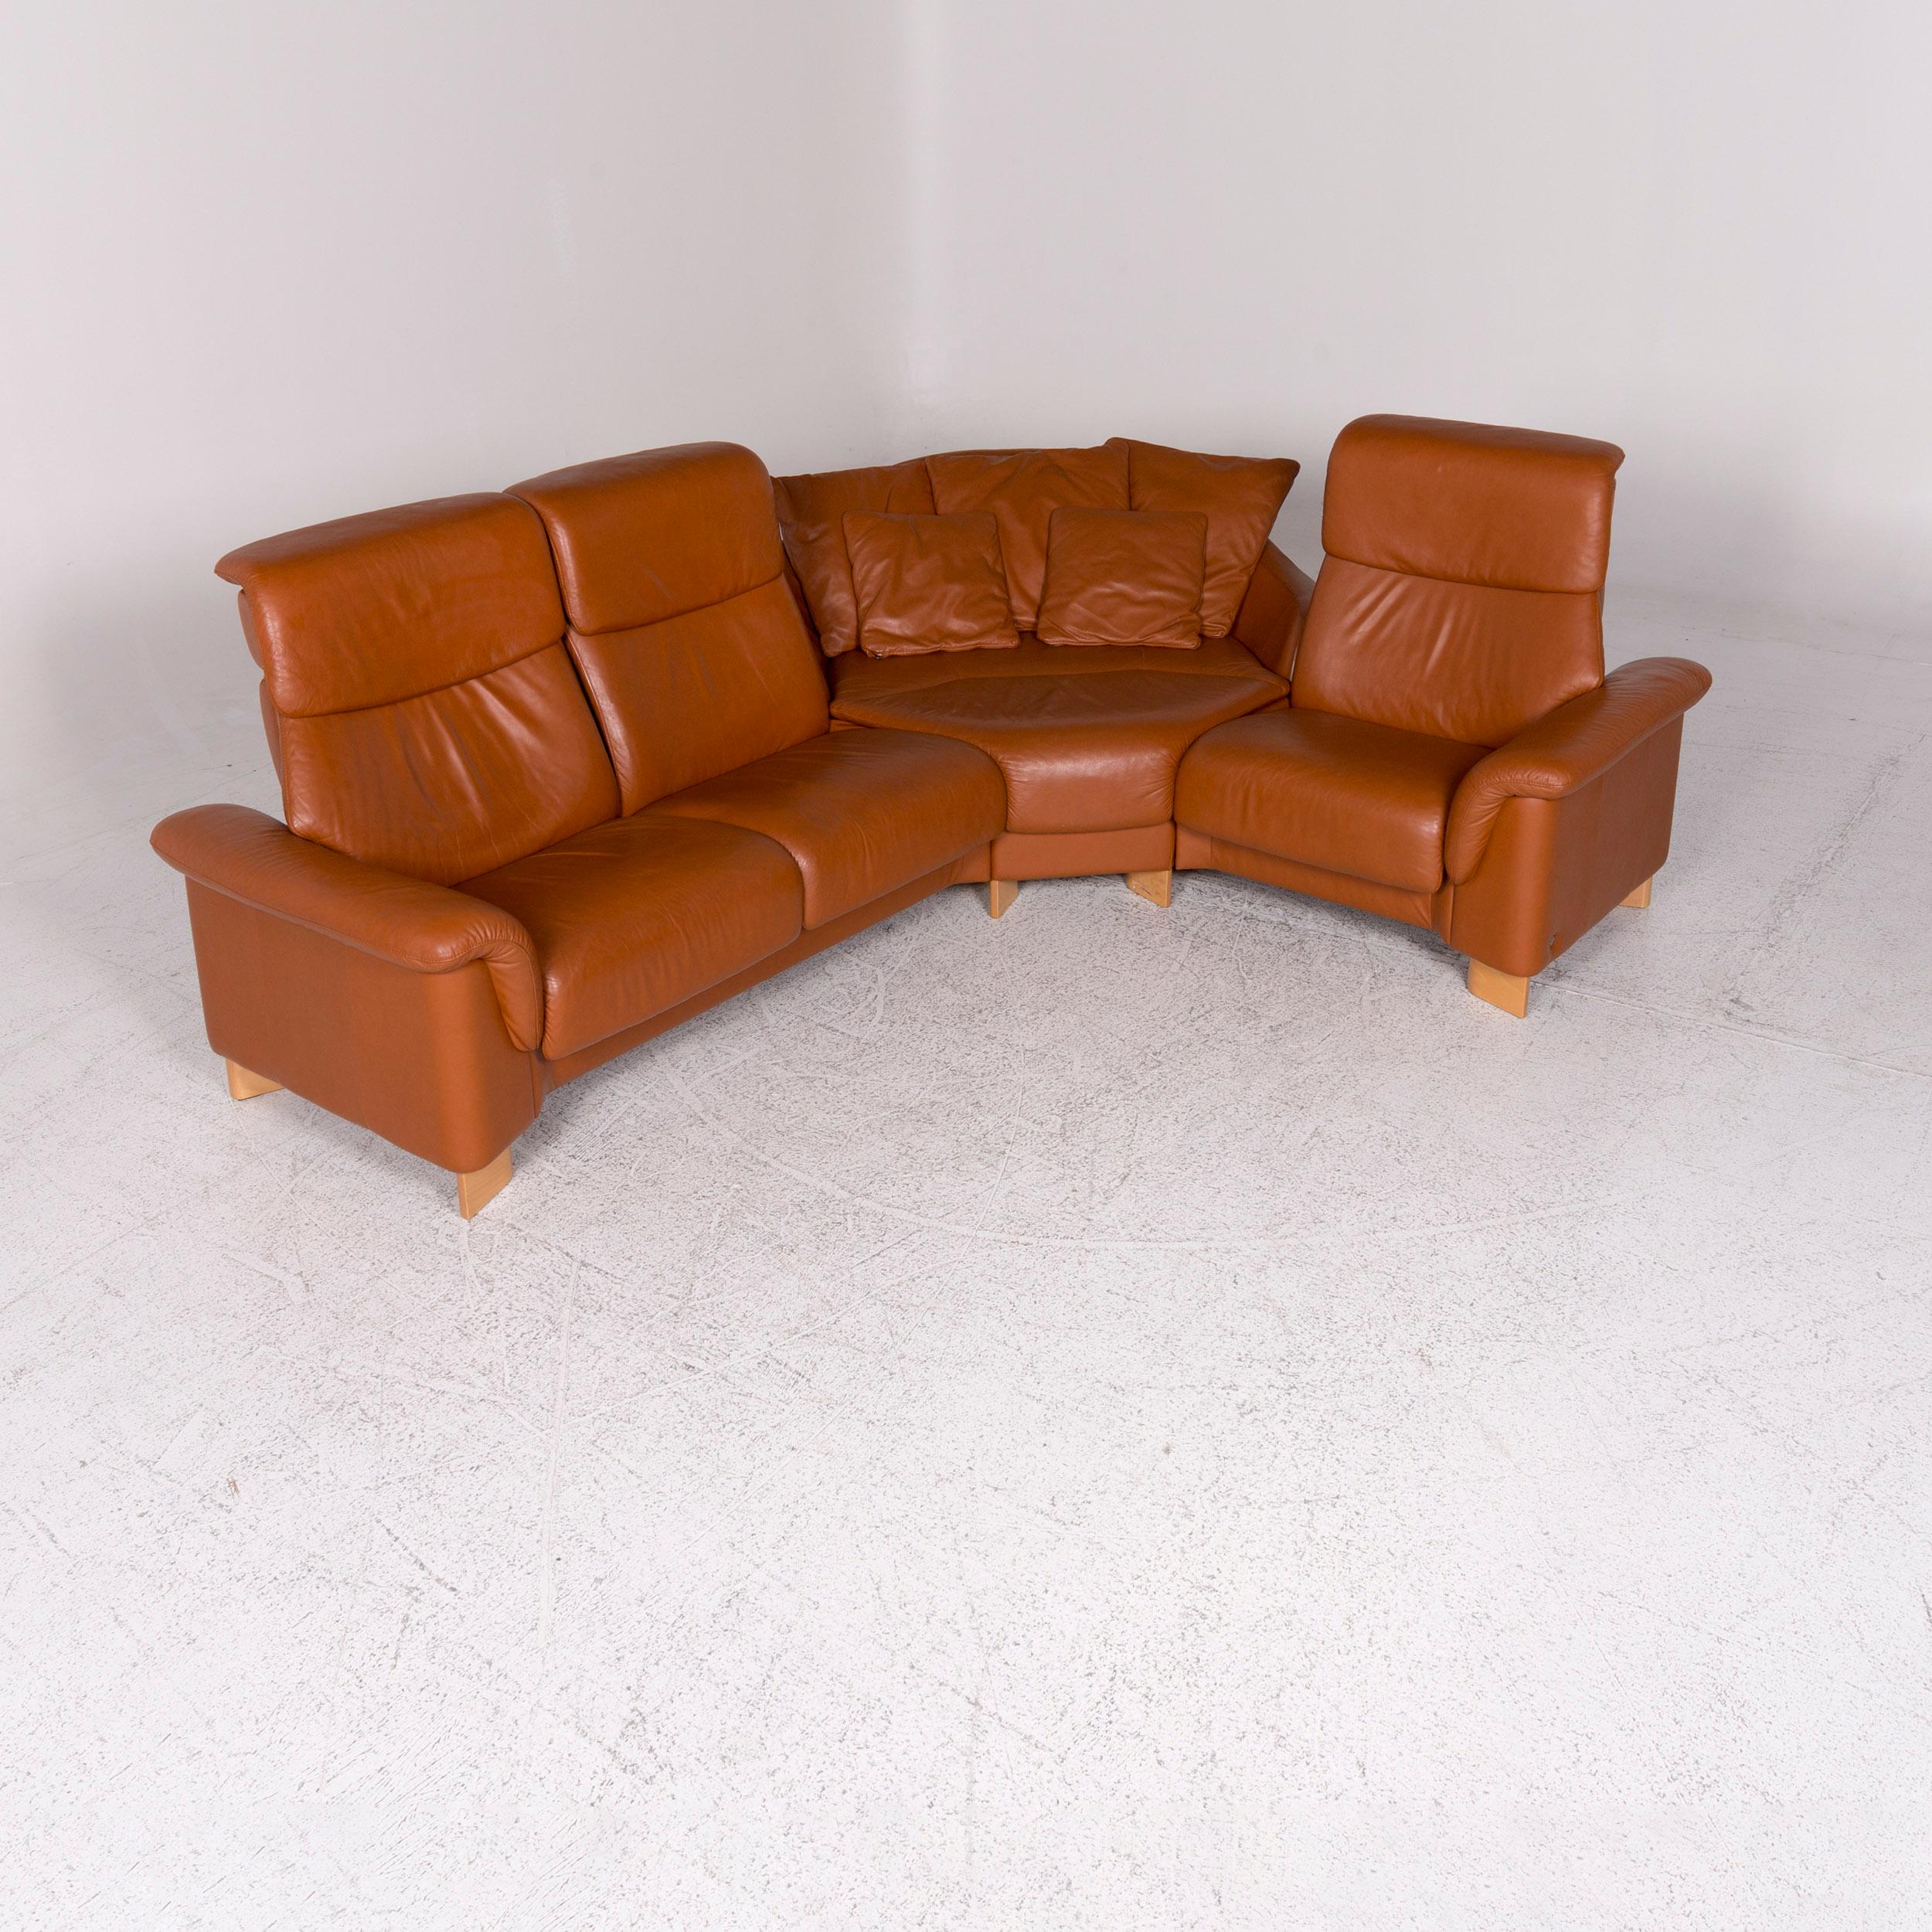 We bring to you a Stressless leather sofa brown corner sofa.
 
Product measurements in centimetres:
 
Depth 88
Width 288
Height 103
Seat-height 46
Rest-height 58
Seat-depth 53
Seat-width 178
Back-height 62.
 